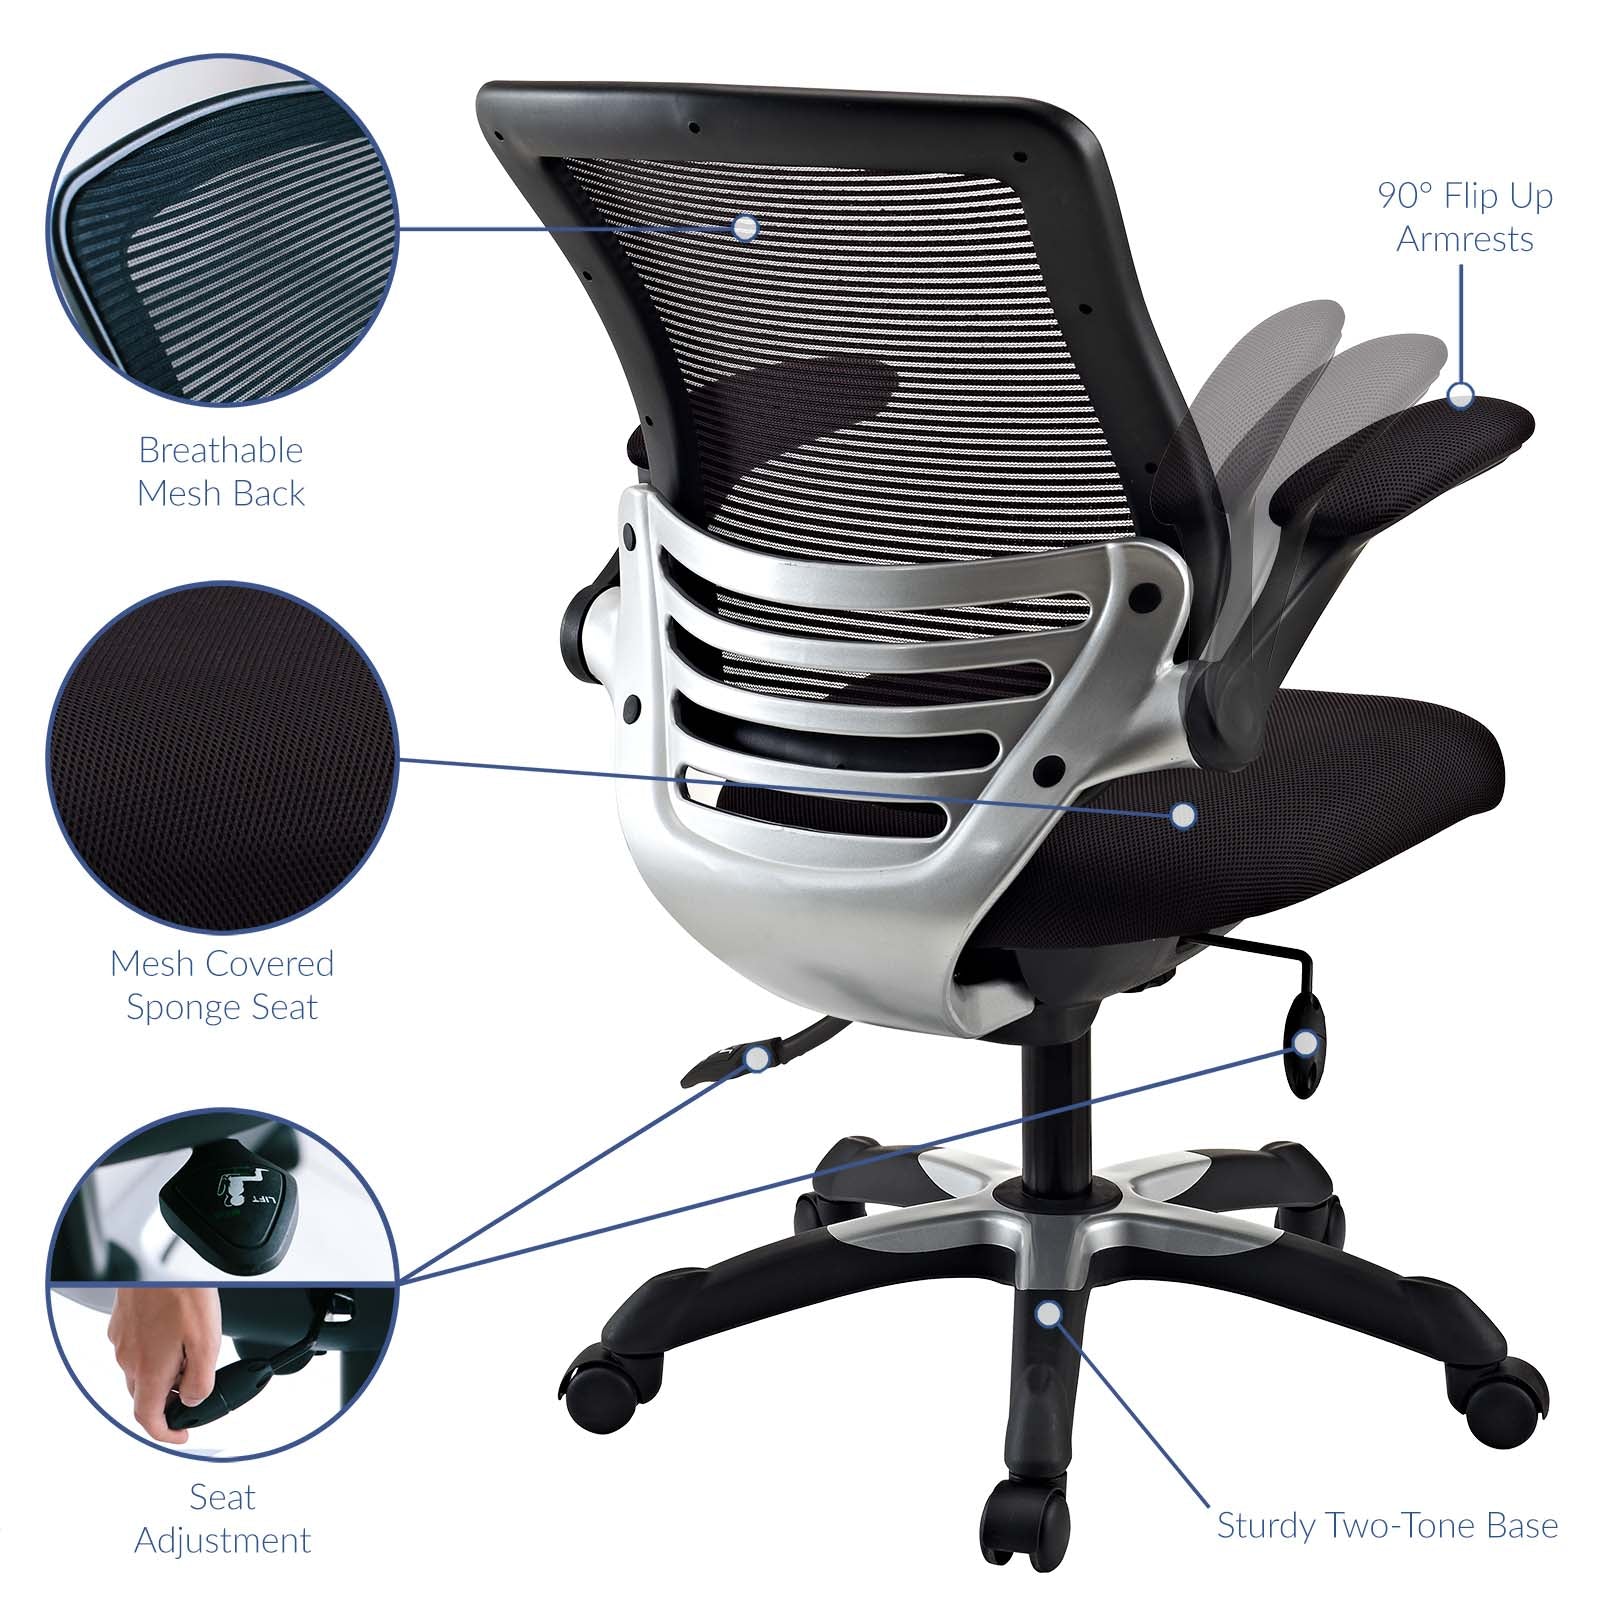 Edge Mesh Office Chair-Office Chair-Modway-Wall2Wall Furnishings